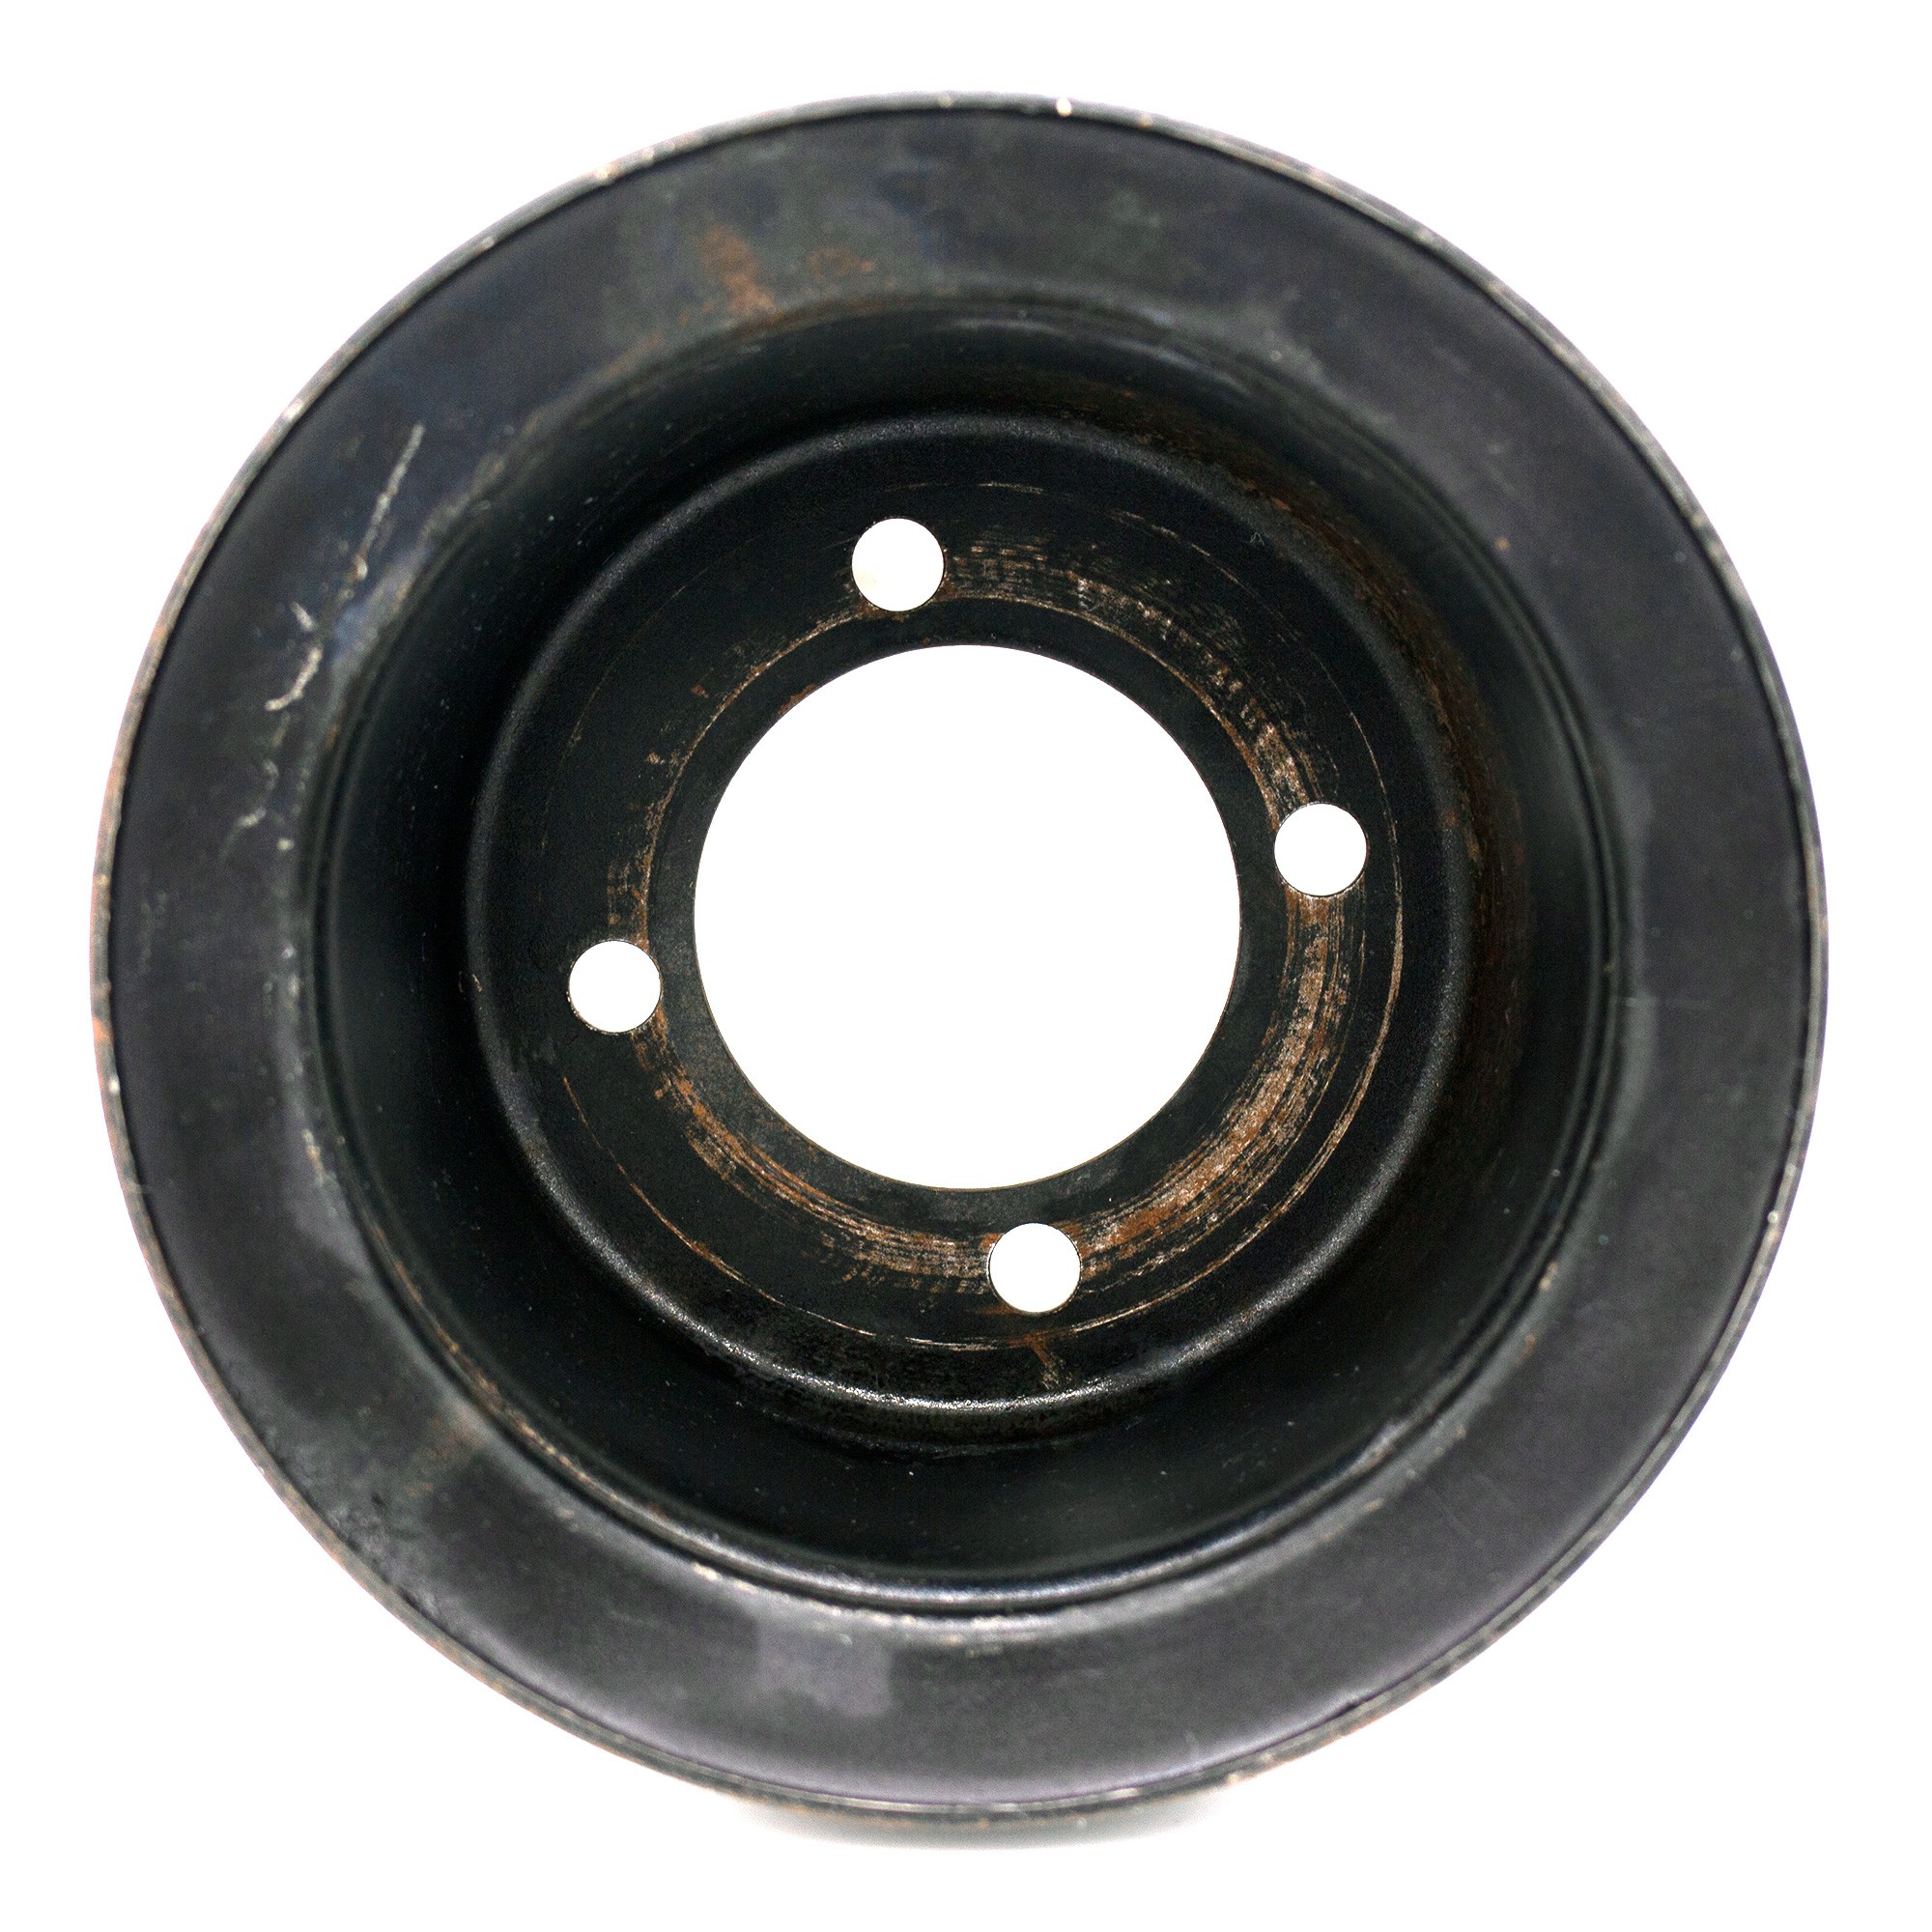 Fan Pulley for Water Pump Series 2 2.25LITRE and Series 1 and Series 2 2 Lt Diesel.